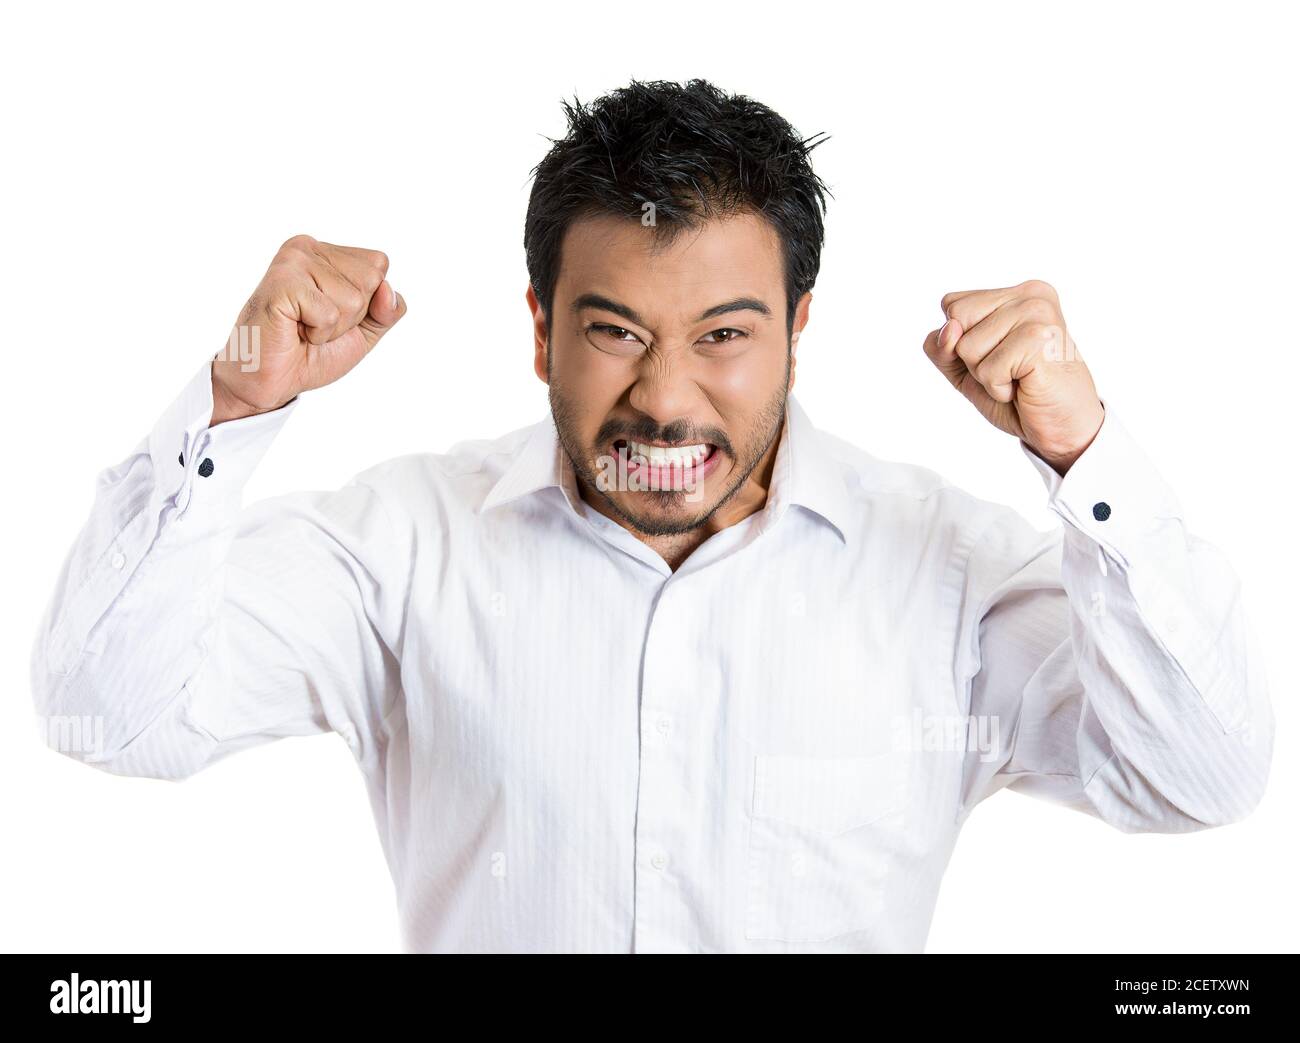 Portrait of an angry man with hands in air, wide open mouth yelling, isolated white background. Negative emotion, facial expression feelings. Stock Photo